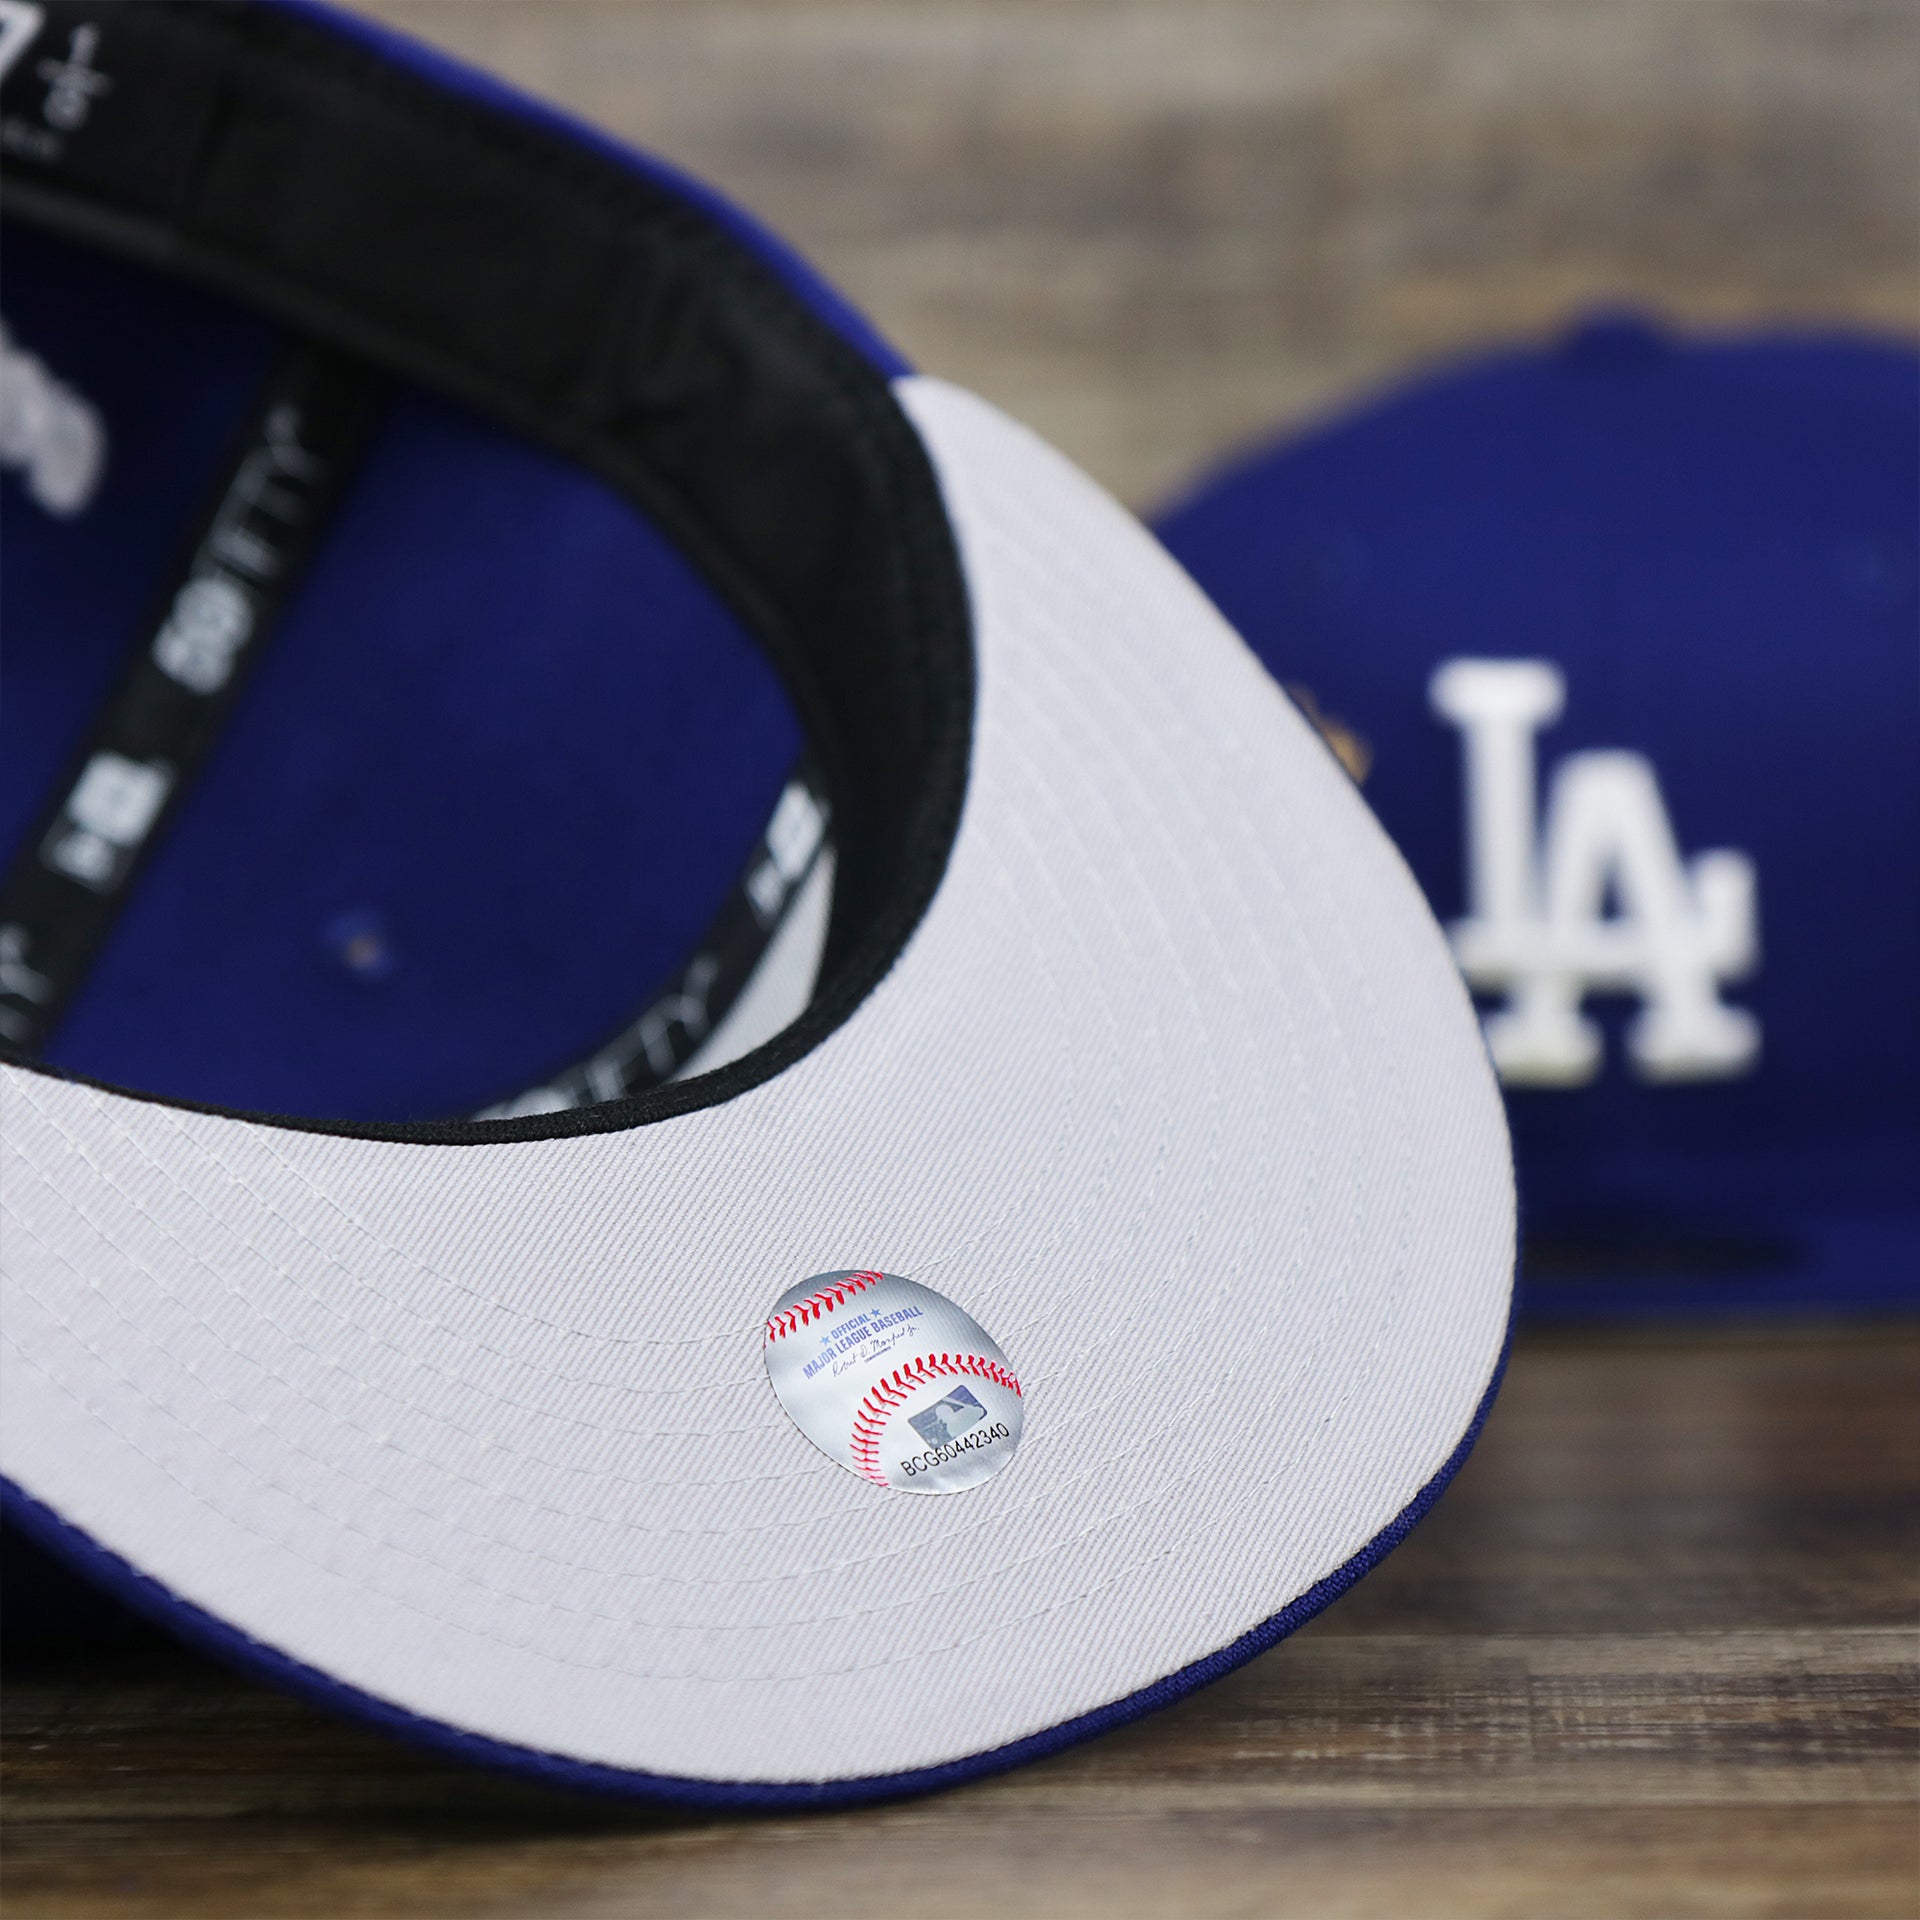 The undervisor on the Los Angeles Dodgers Crown Champions Gray Bottom World Championship Wins Embroidered Fitted Cap | Royal Blue 59Fifty Cap